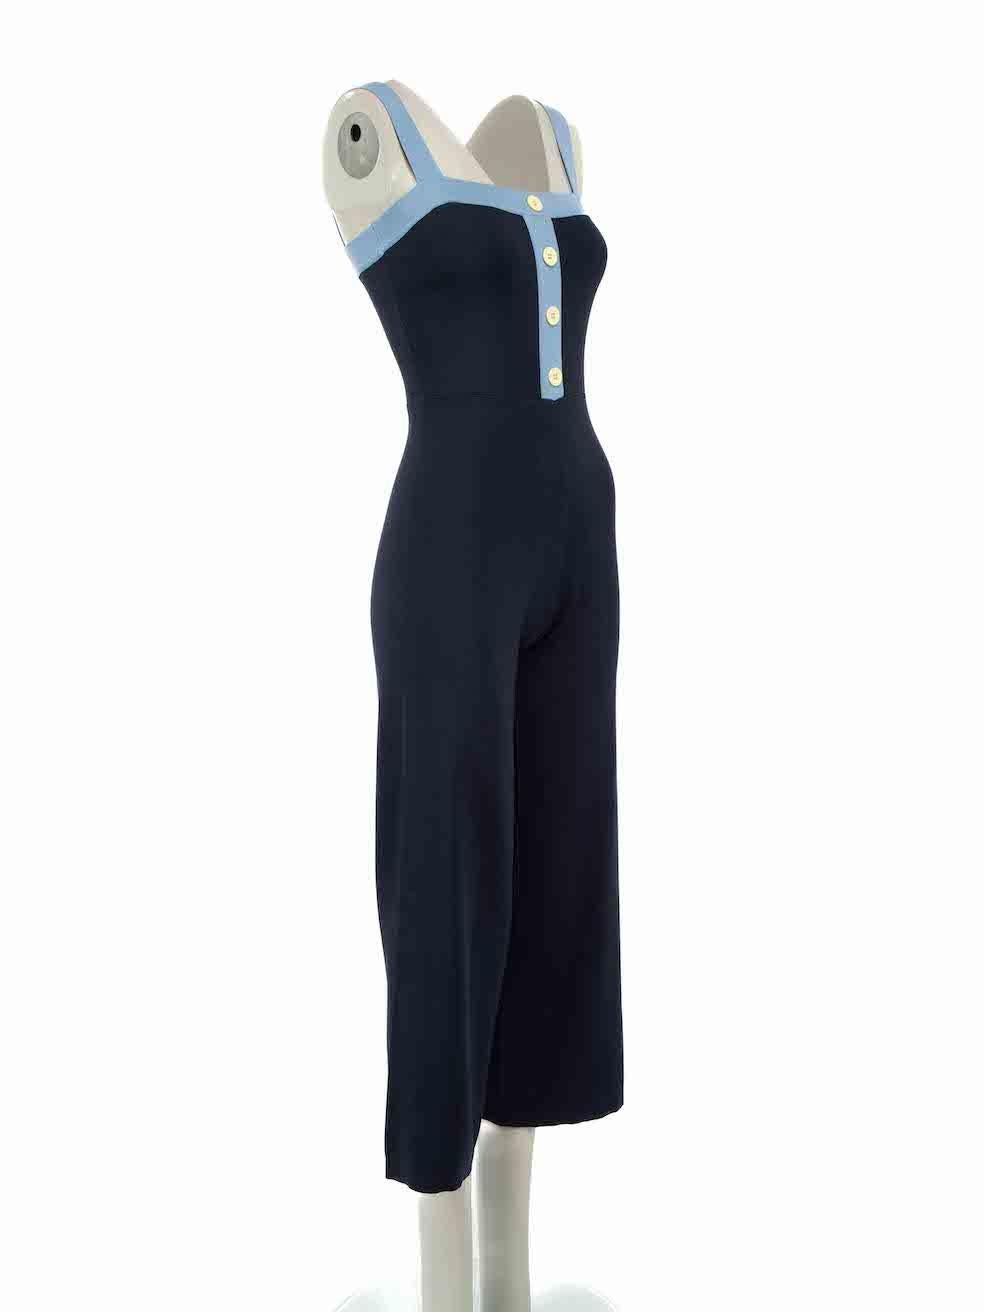 CONDITION is Very good. Minimal wear to jumpsuit is evident. Minimal wear to the front button with small chip on this used STAUD designer resale item.
 
Details
Blue
Viscose
Jumpsuit
Sleeveless
Square neckline
Front buttons accent
Knitted and